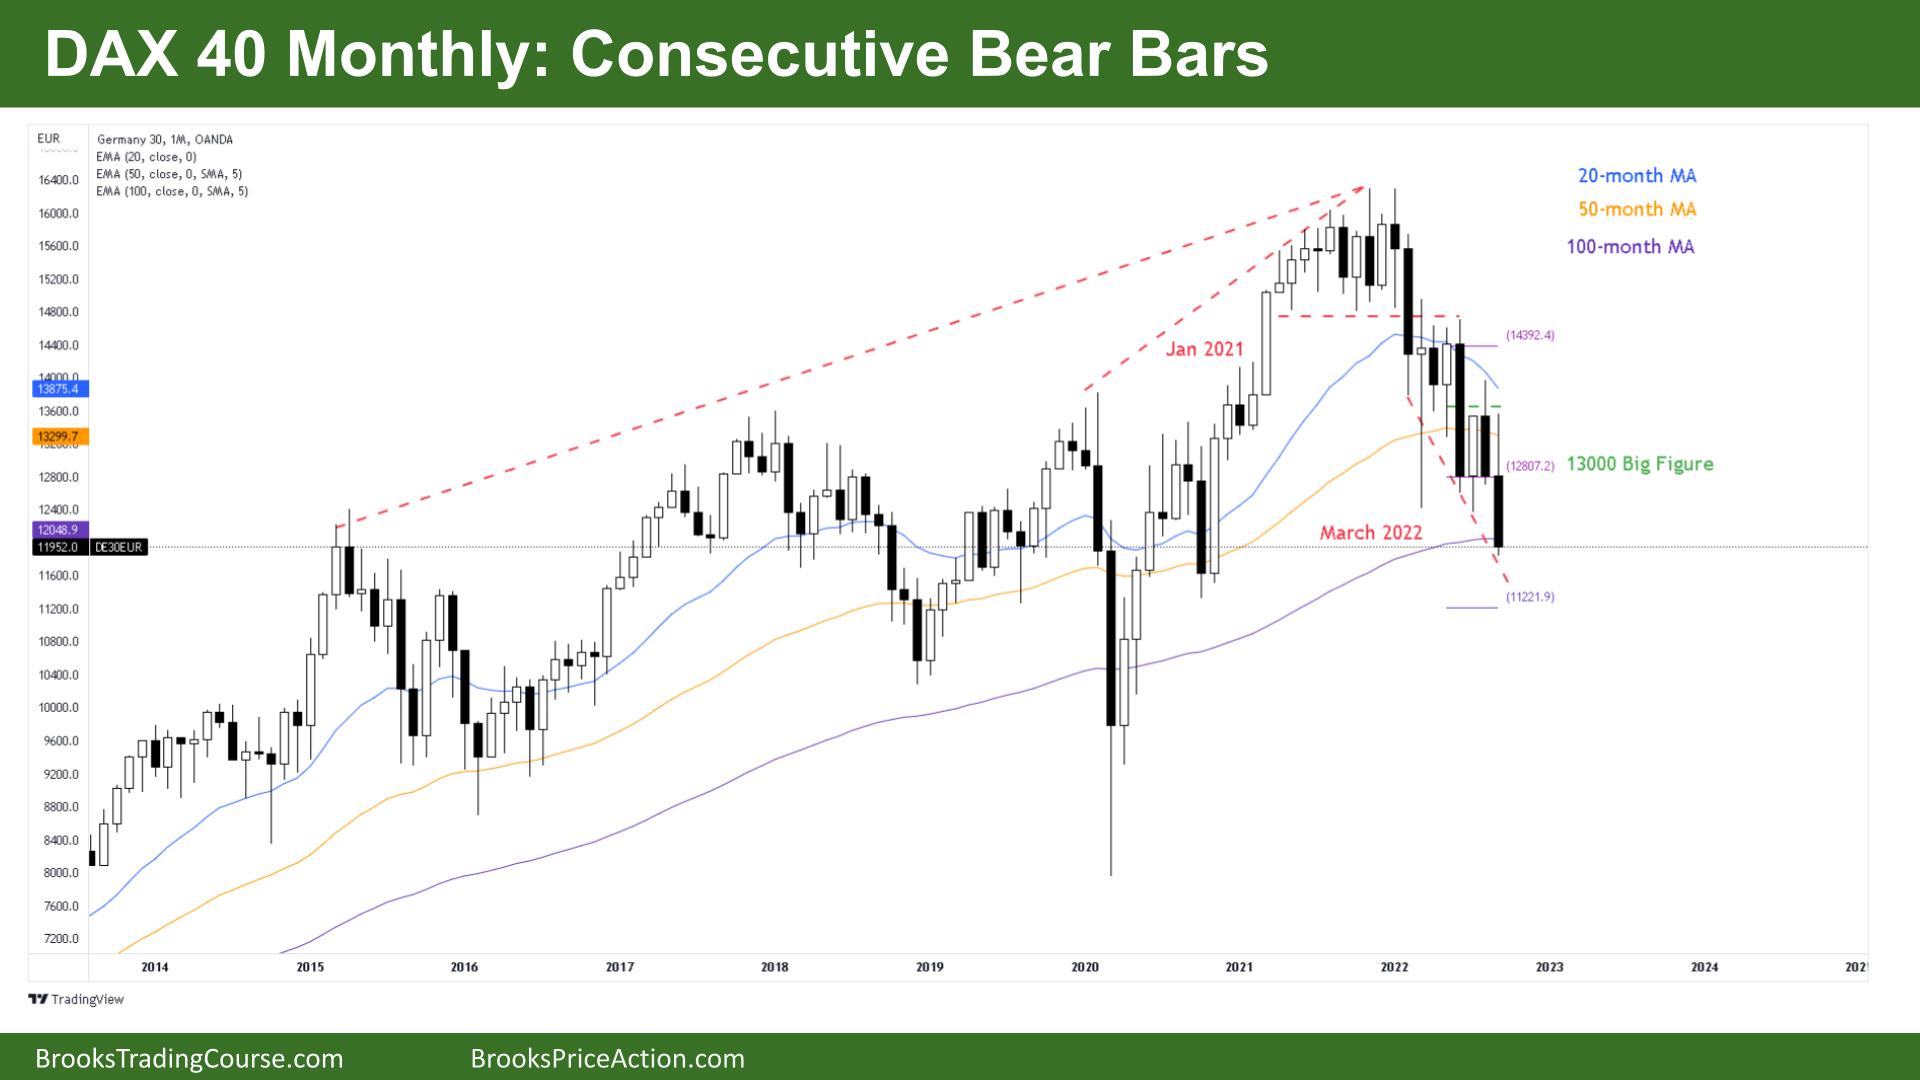 DAX 40 Monthly Consecutive Bear Bars Closing on Lows